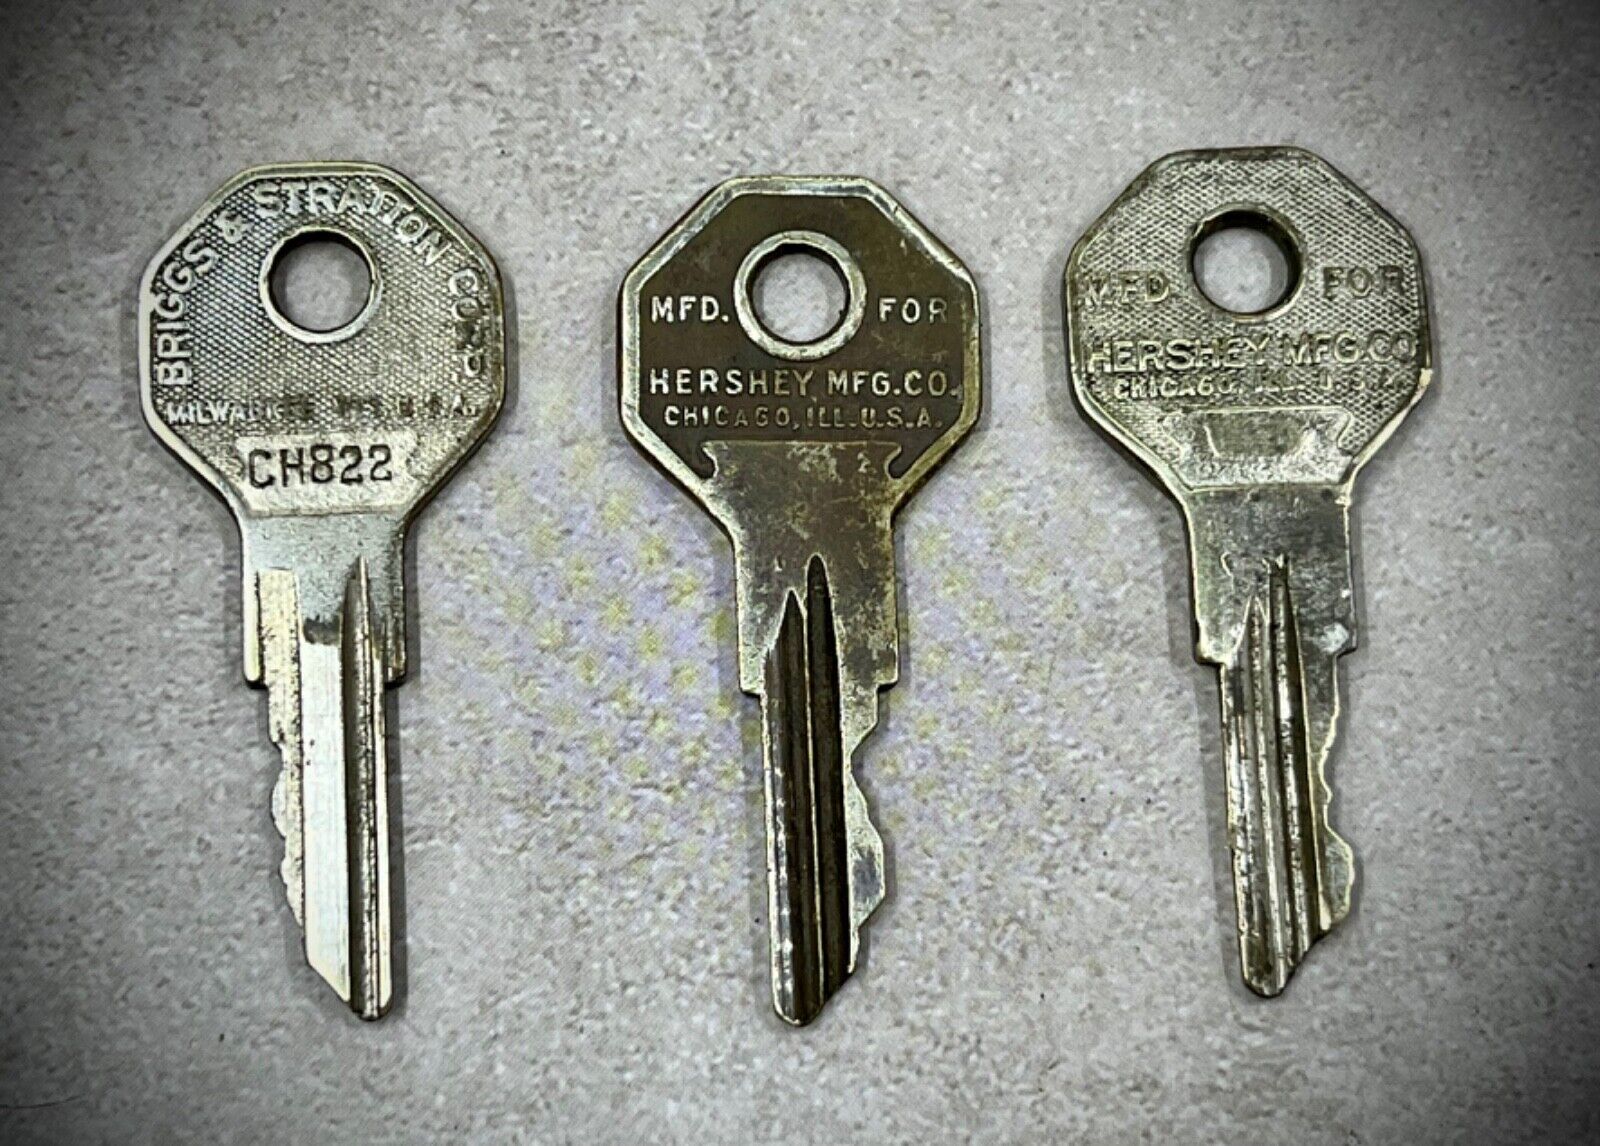 Vintage Keys made for Hershey MFG. Co. Briggs & Stratton Lot of 3